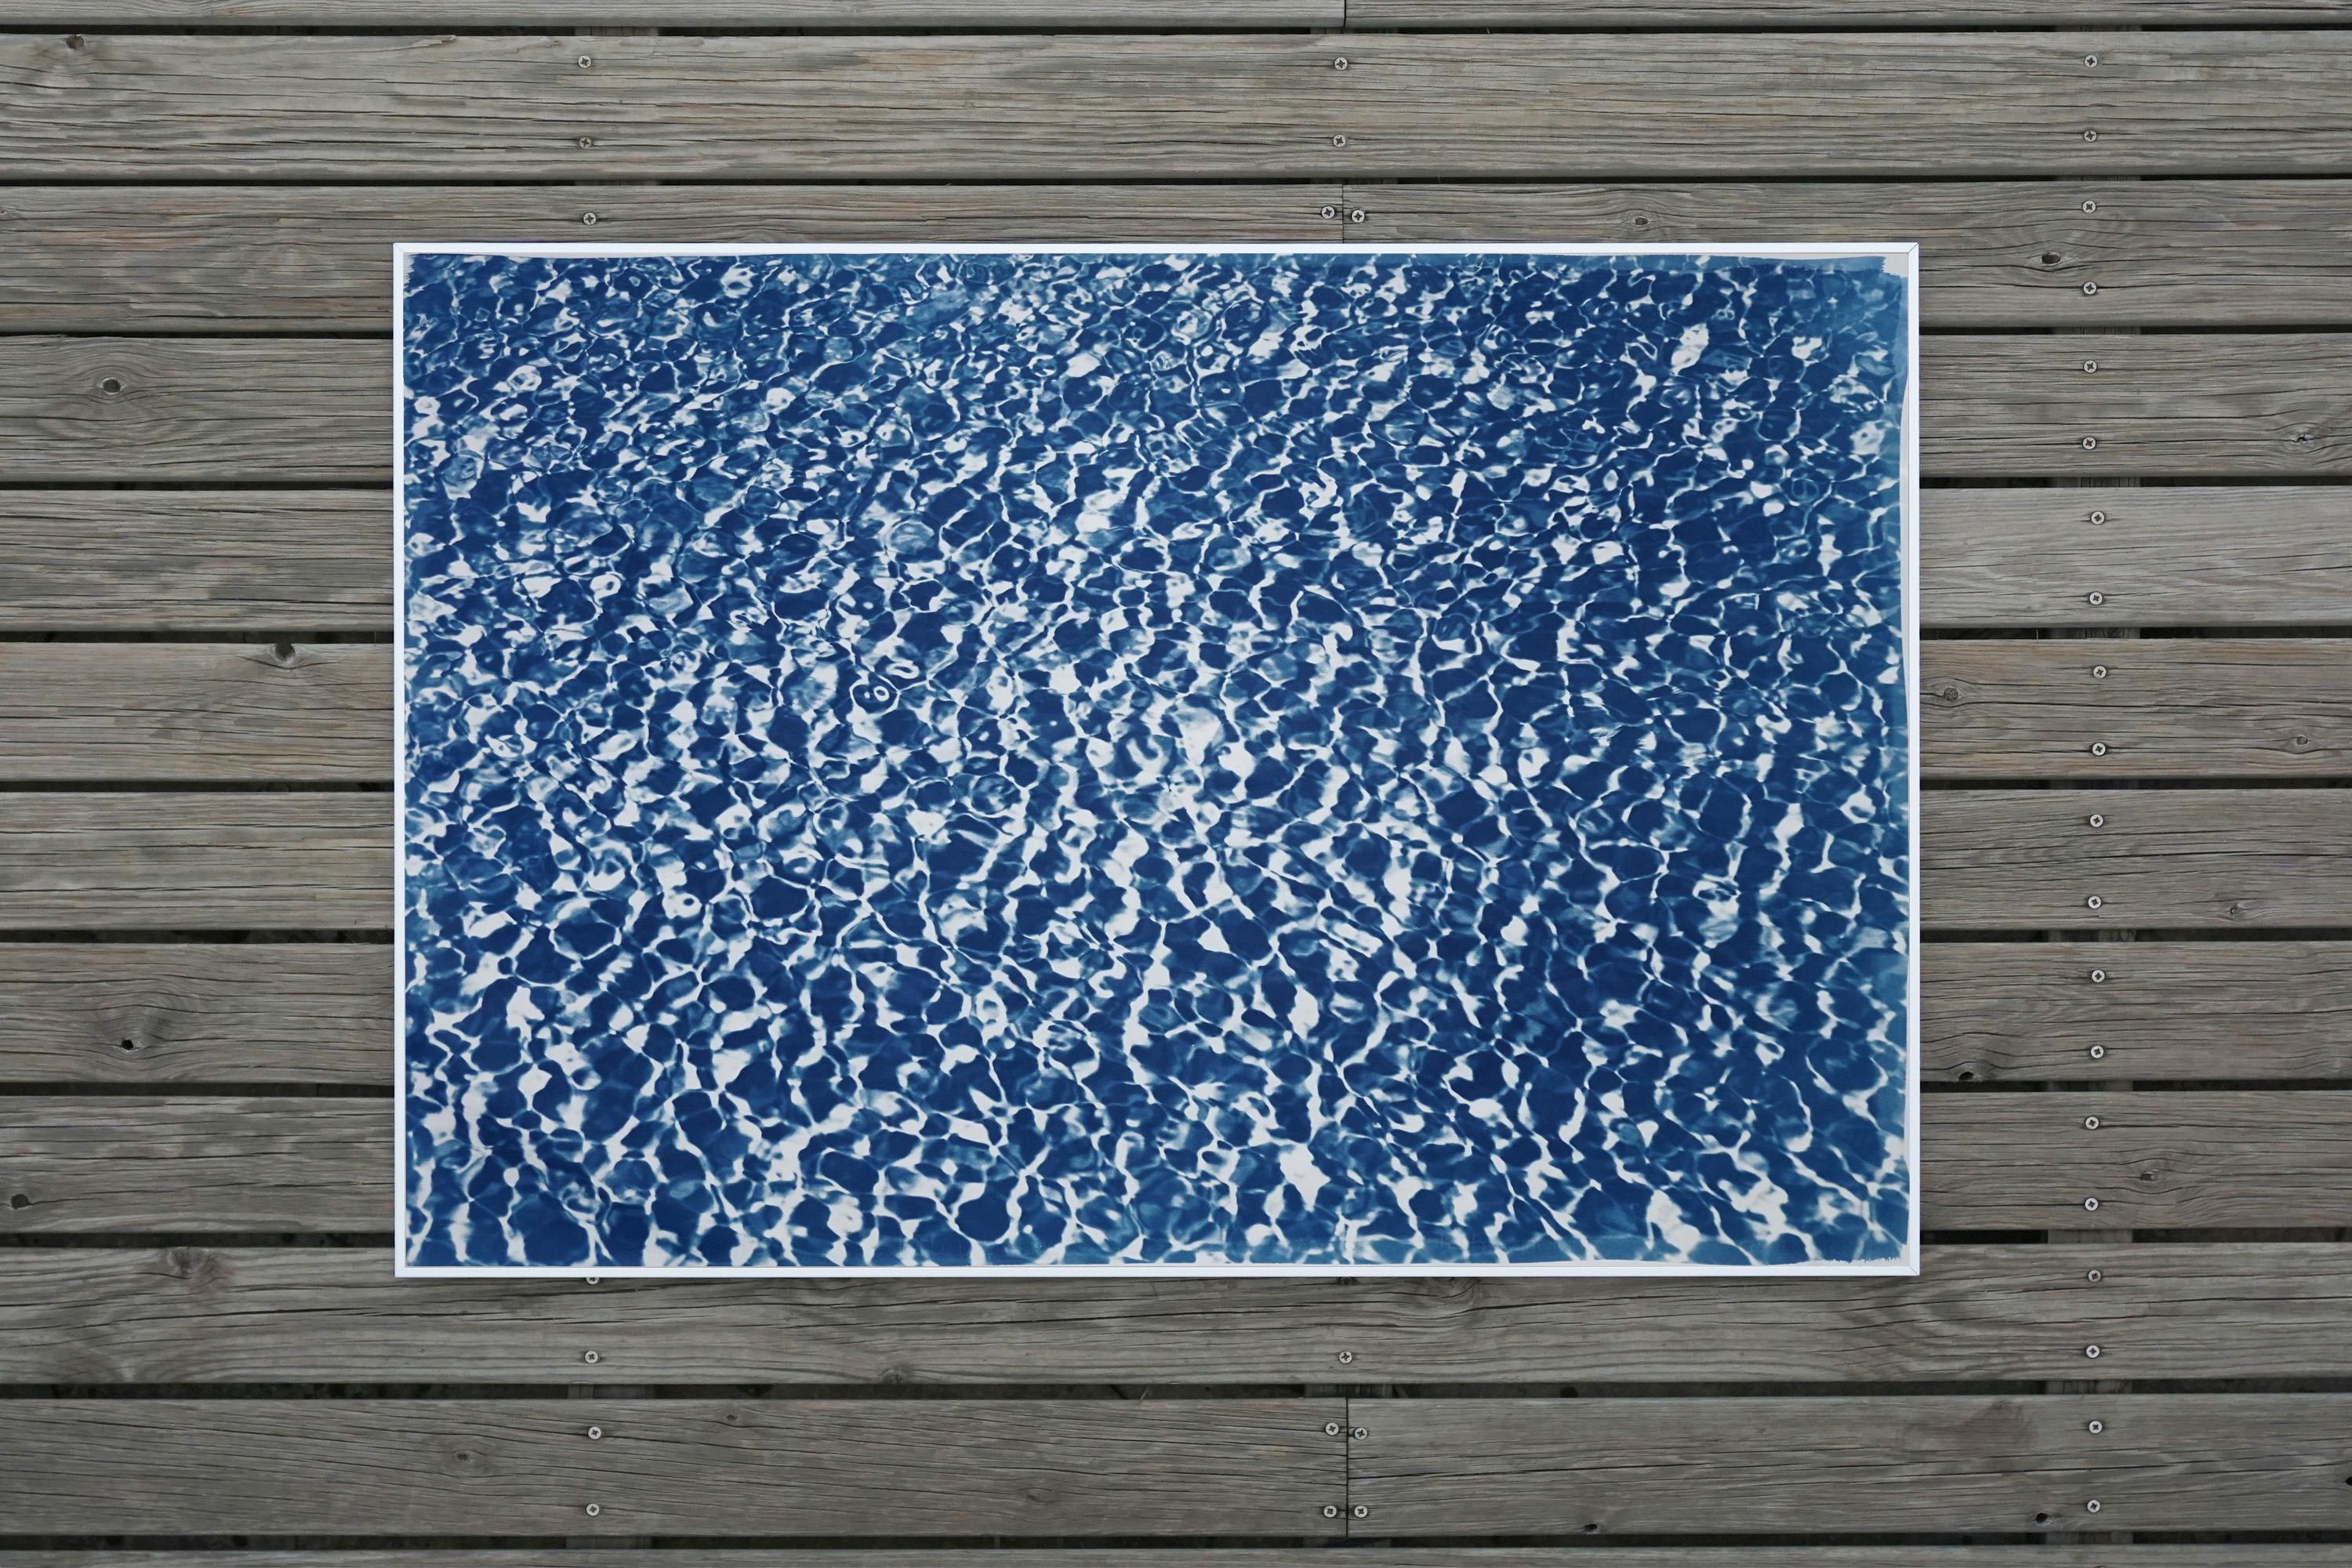 Infinity Pool Water Reflections, Blue & White Pattern, Handmade Cyanotype Print For Sale 4